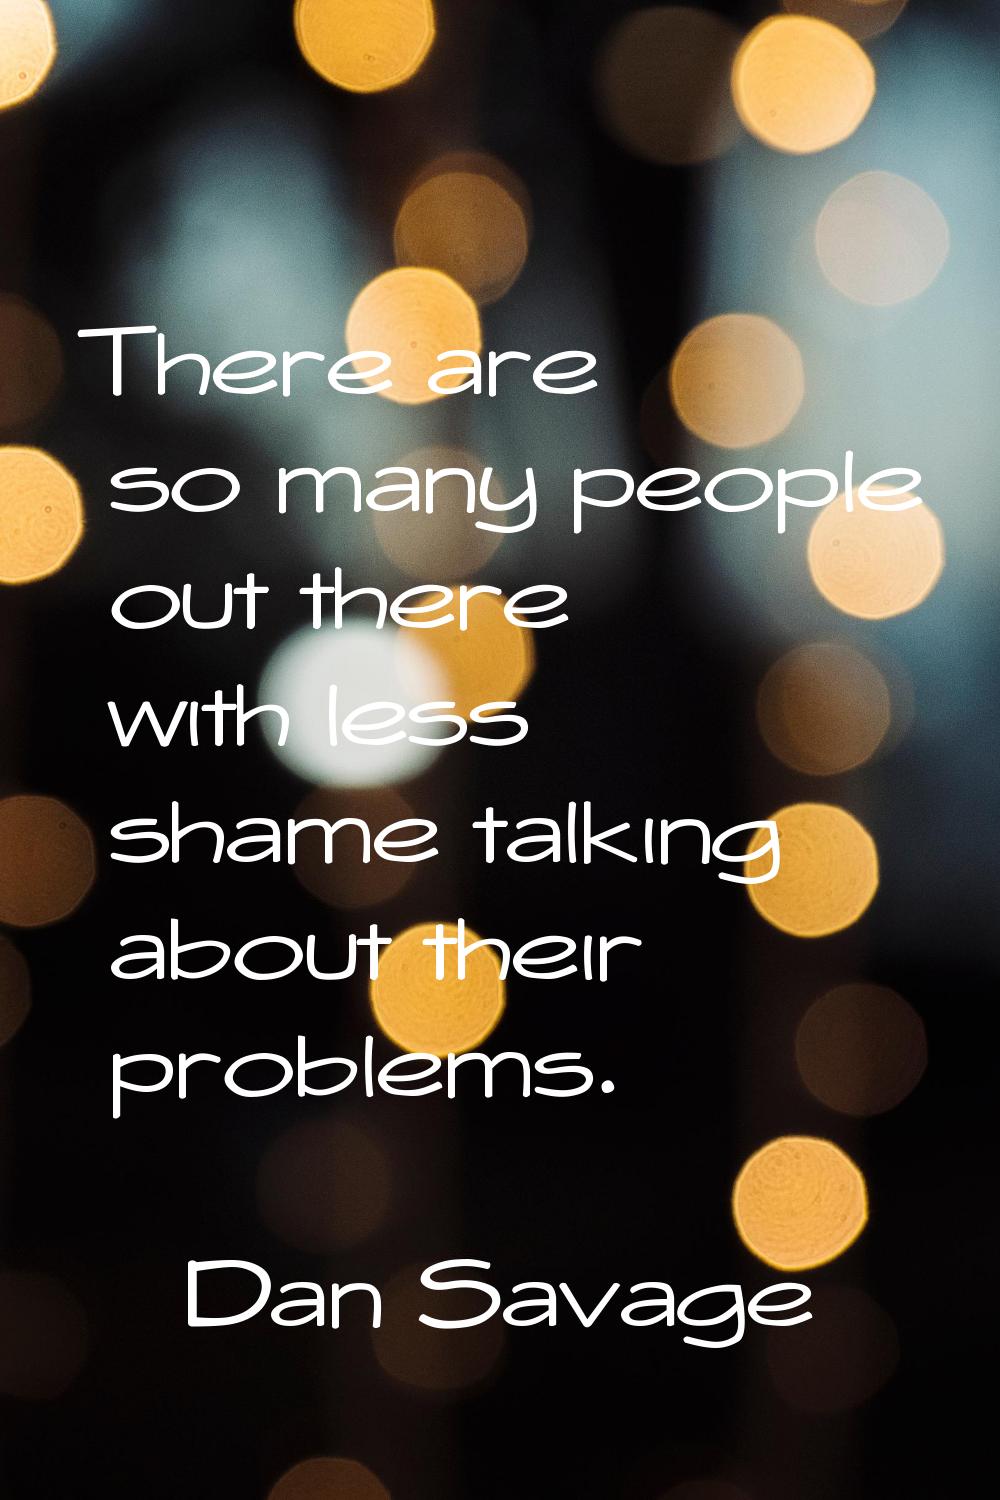 There are so many people out there with less shame talking about their problems.